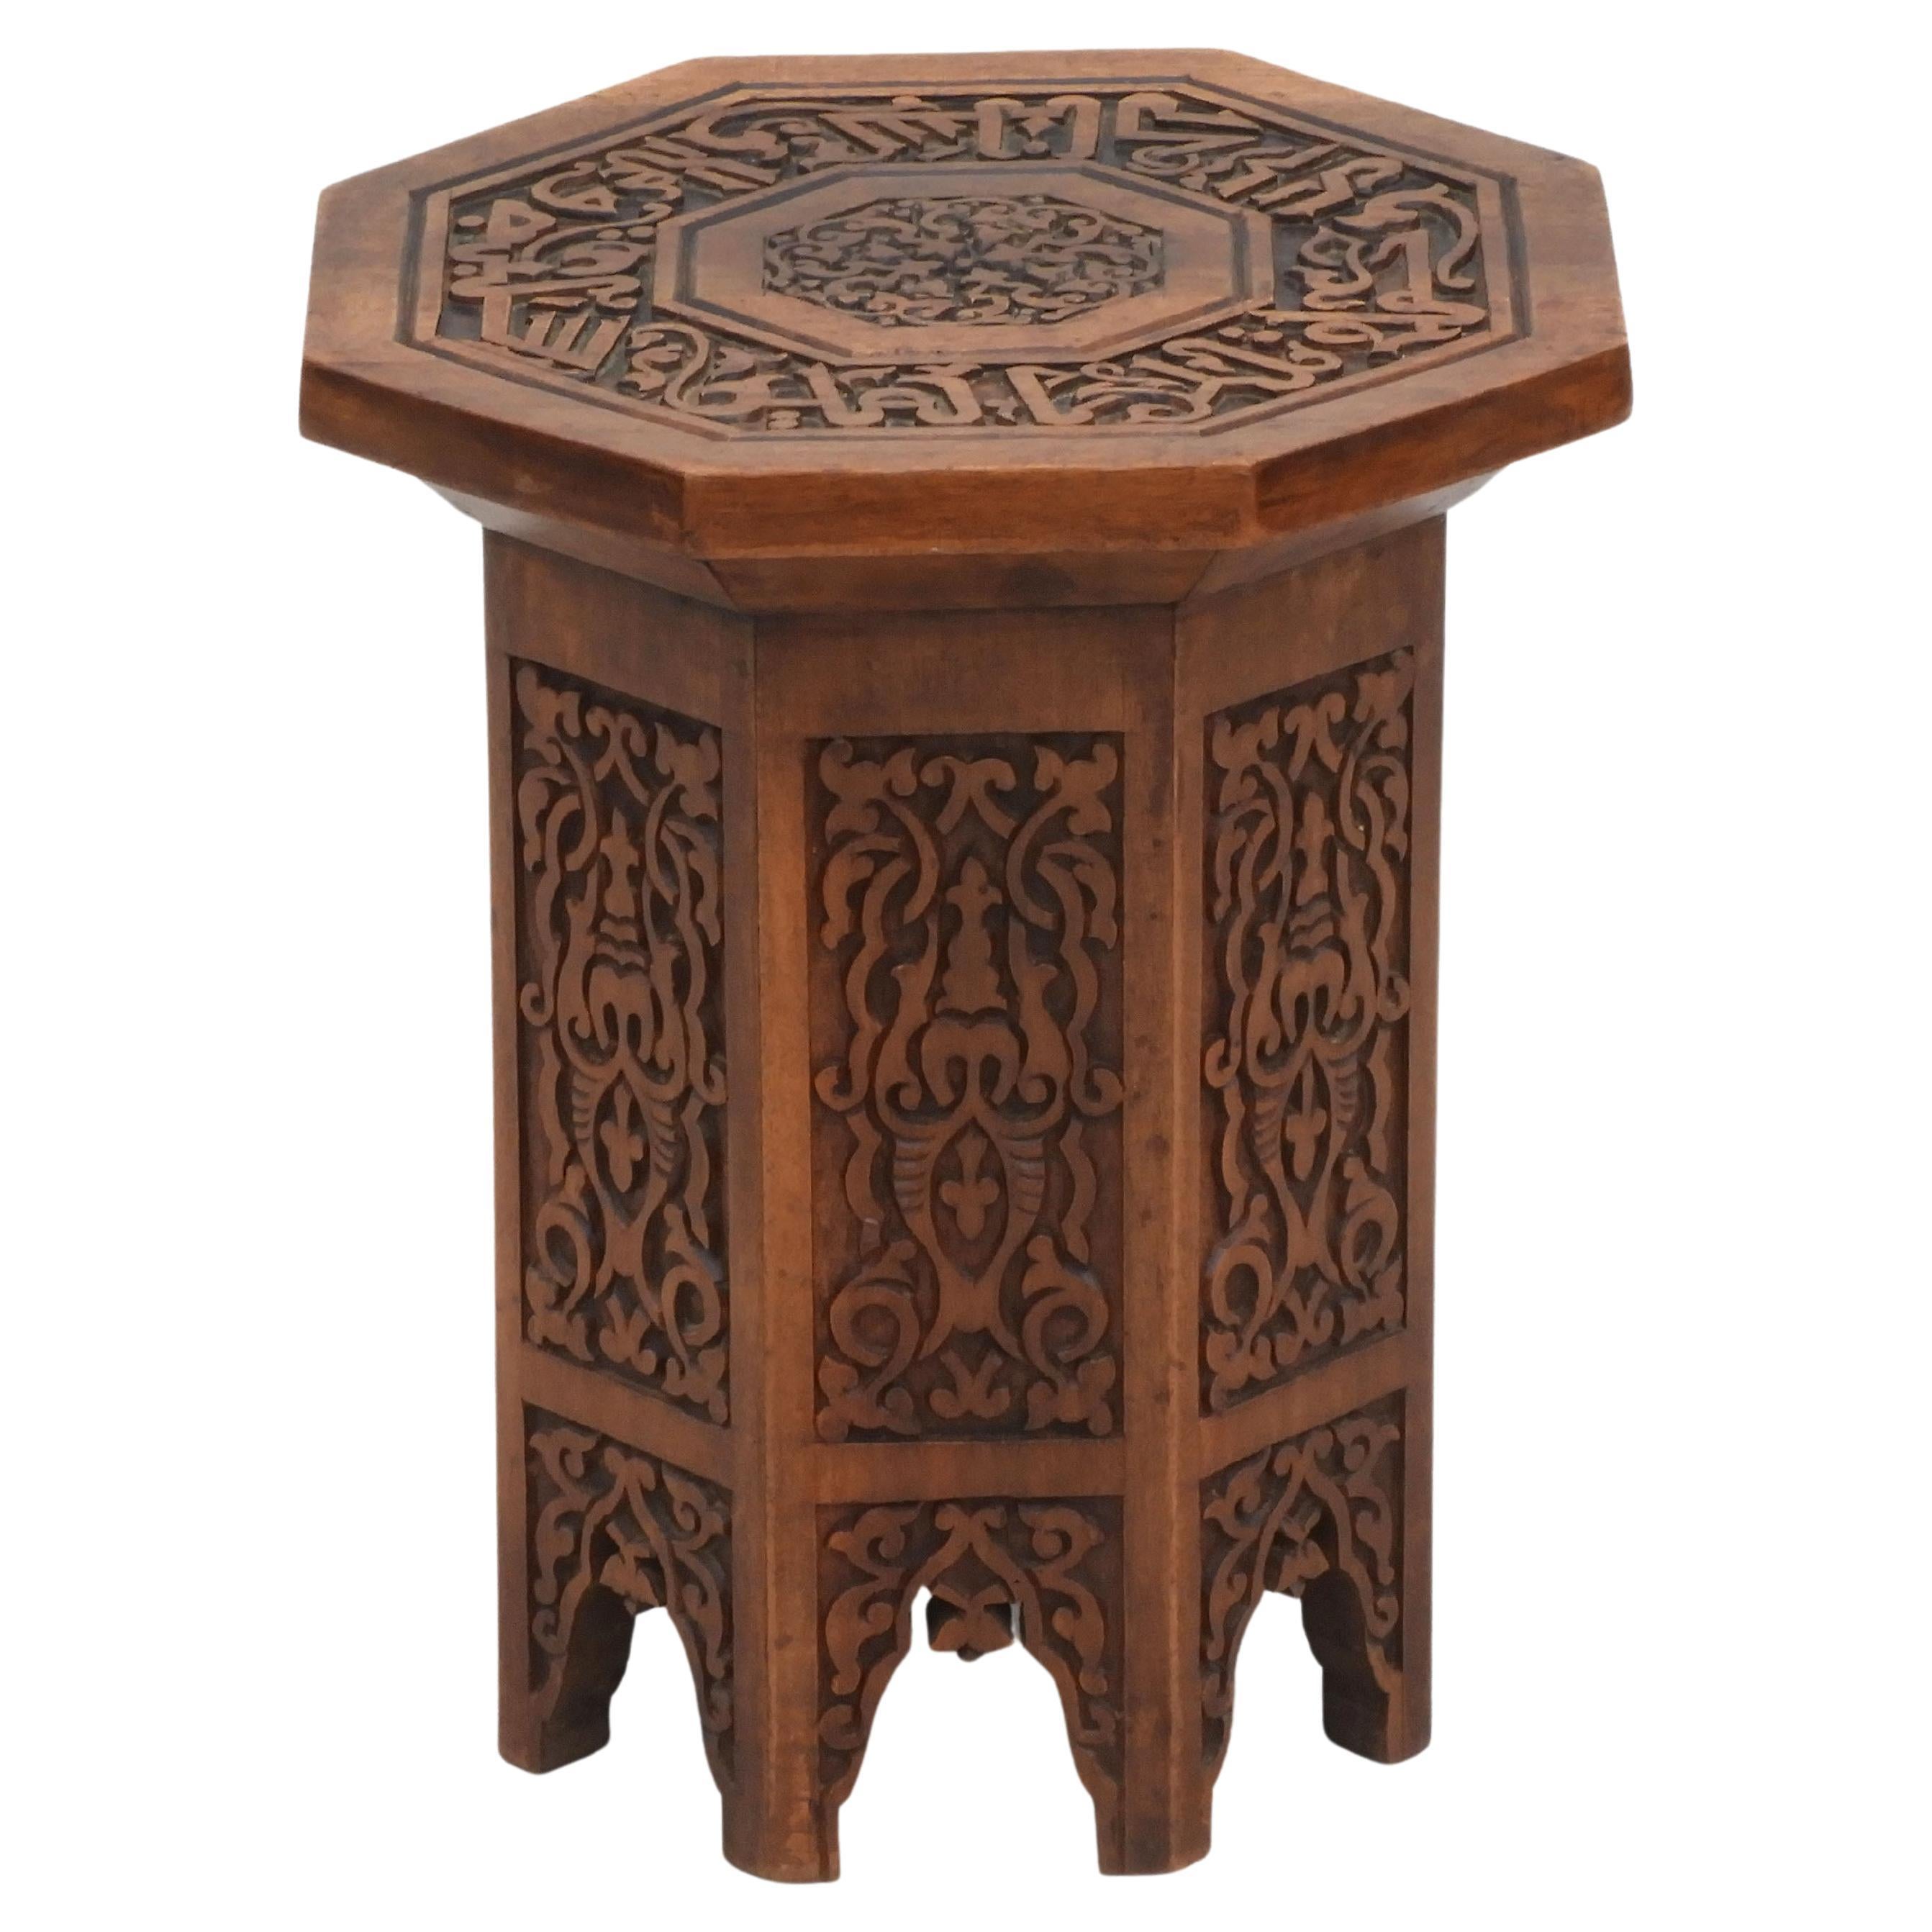 Moroccan Hand Carved Side Table or Tabouret Stool 